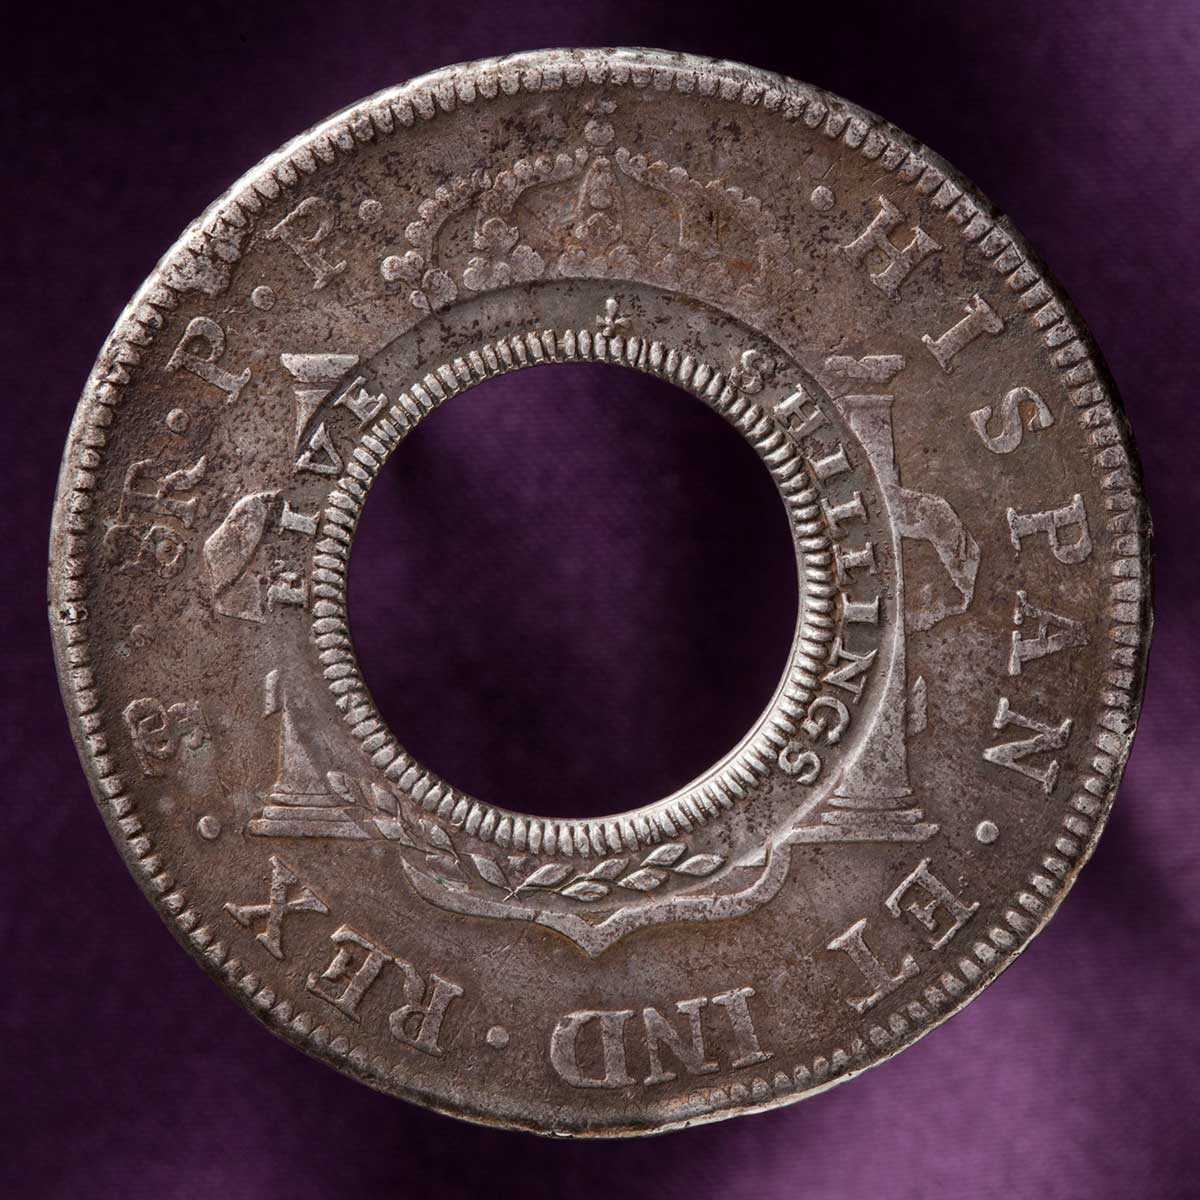 Studio photo of silver coin with missing centre. The original Spanish imprinting in Latin is visible around the outside rim, while the words five shillings have been imprinted around the inside rim. - click to view larger image